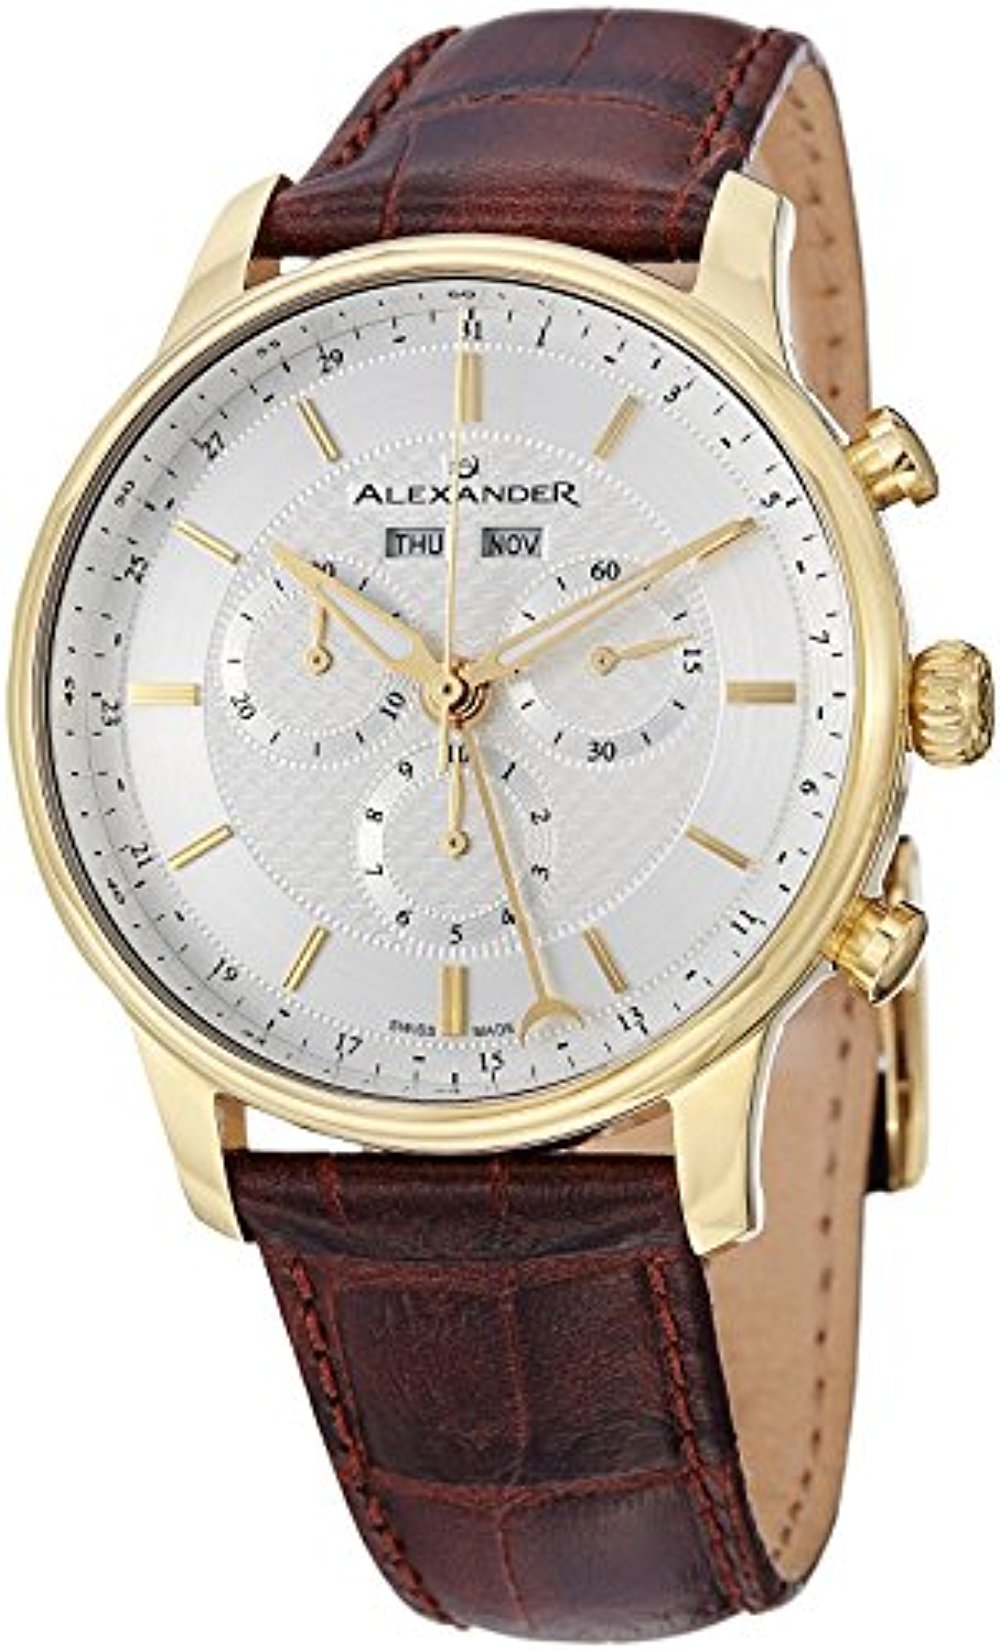 Alexander Statesman Chieftain Men's Multi-function Chronograph Brown Leather Strap Yellow Gold Plated Swiss Made Watch A101-03